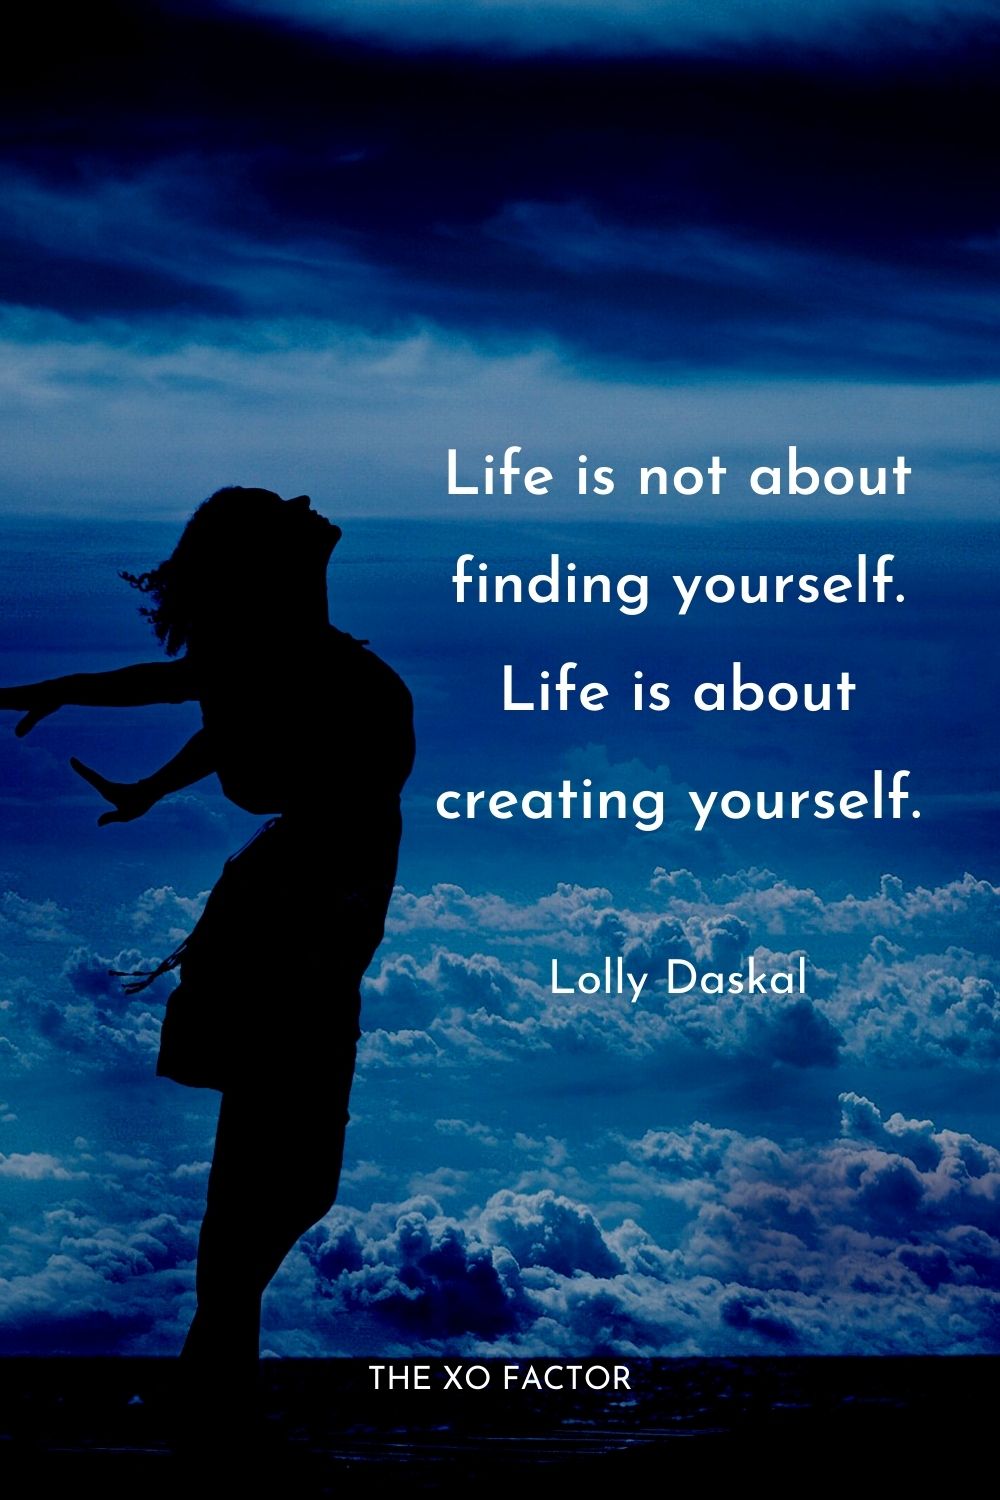 Life is not about finding yourself. Life is about creating yourself.